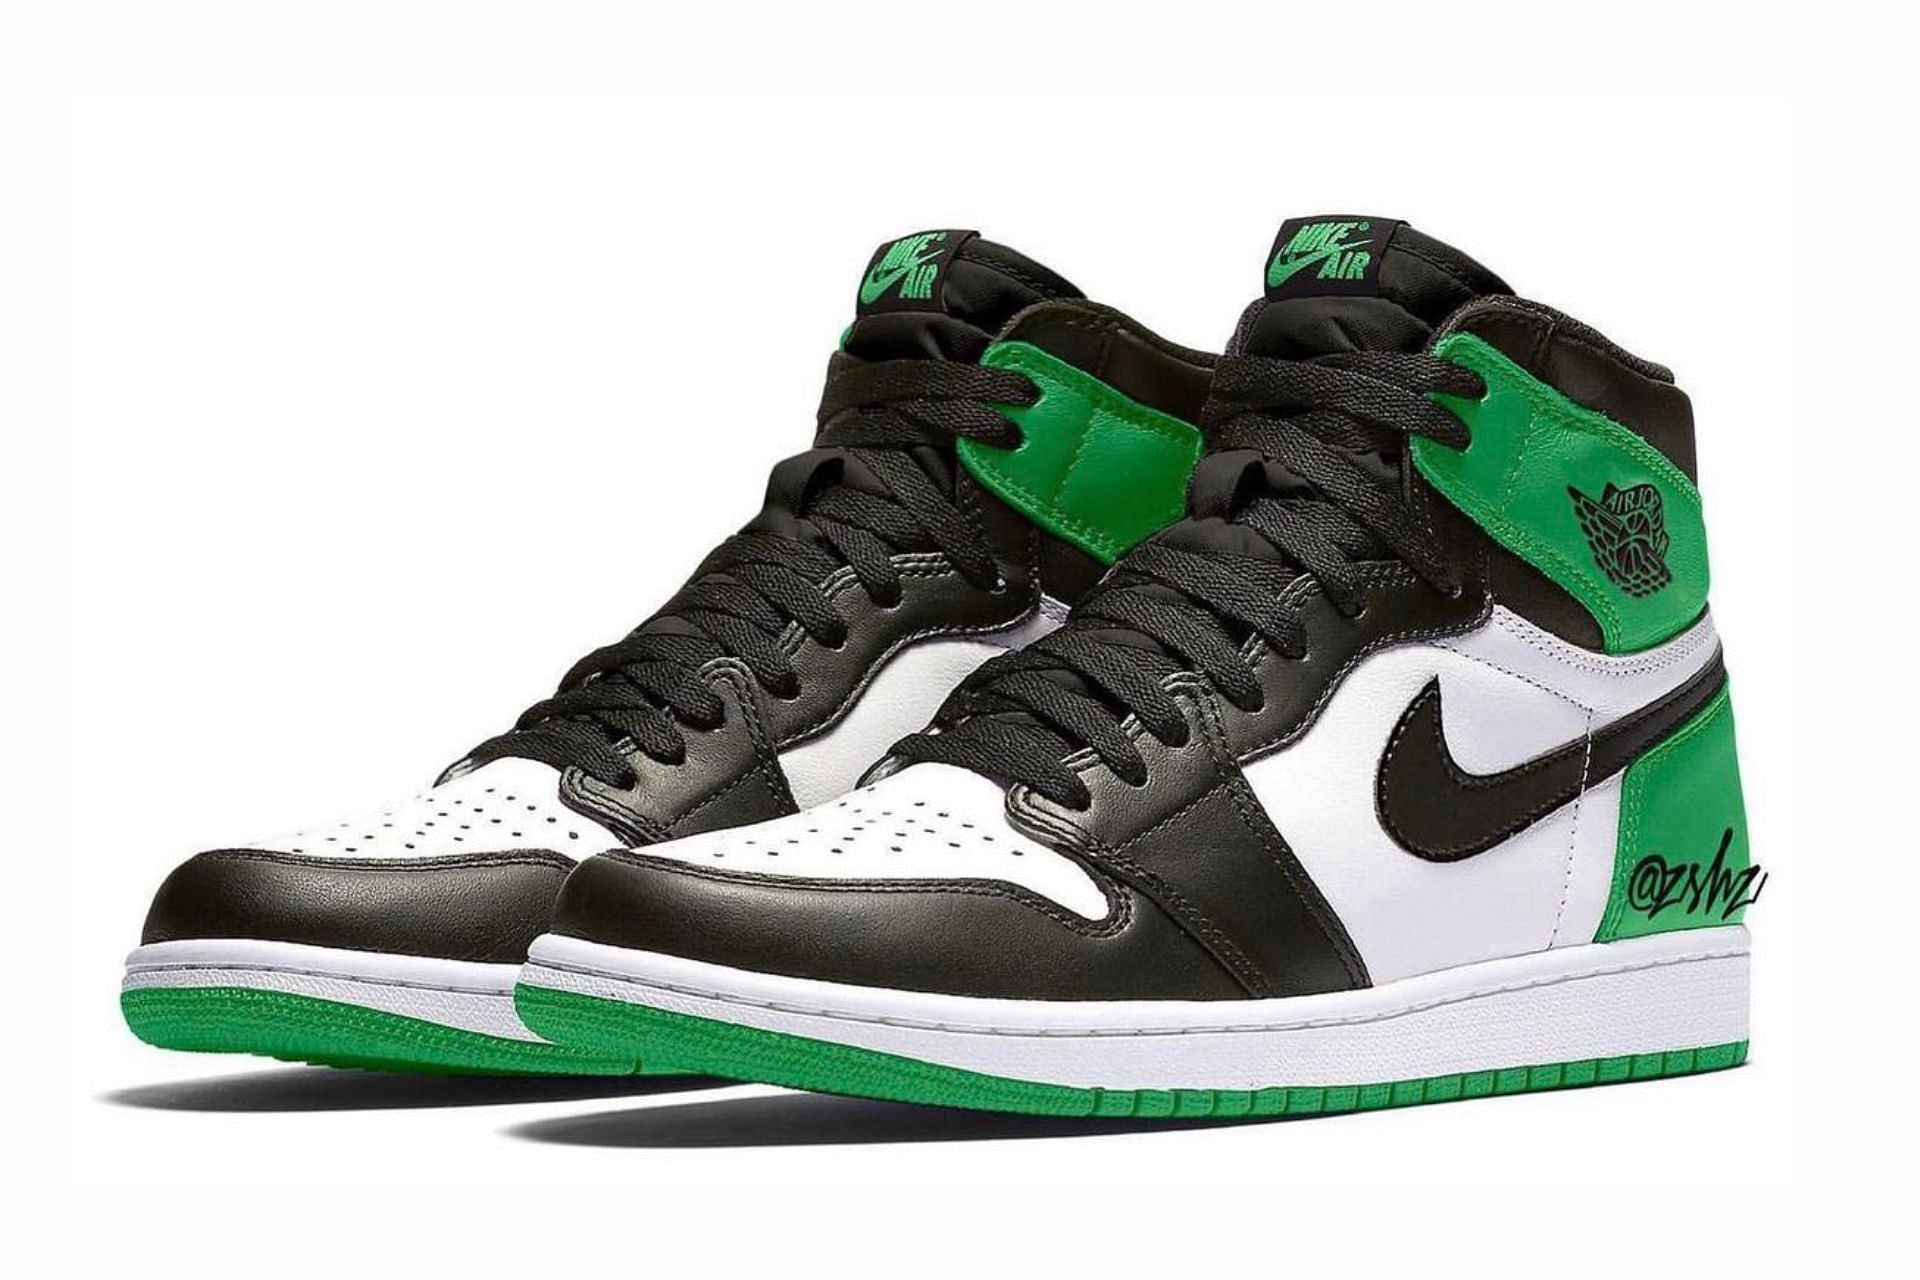 Where to buy Air Jordan 1 High “Lucky Green” shoes? Price, release